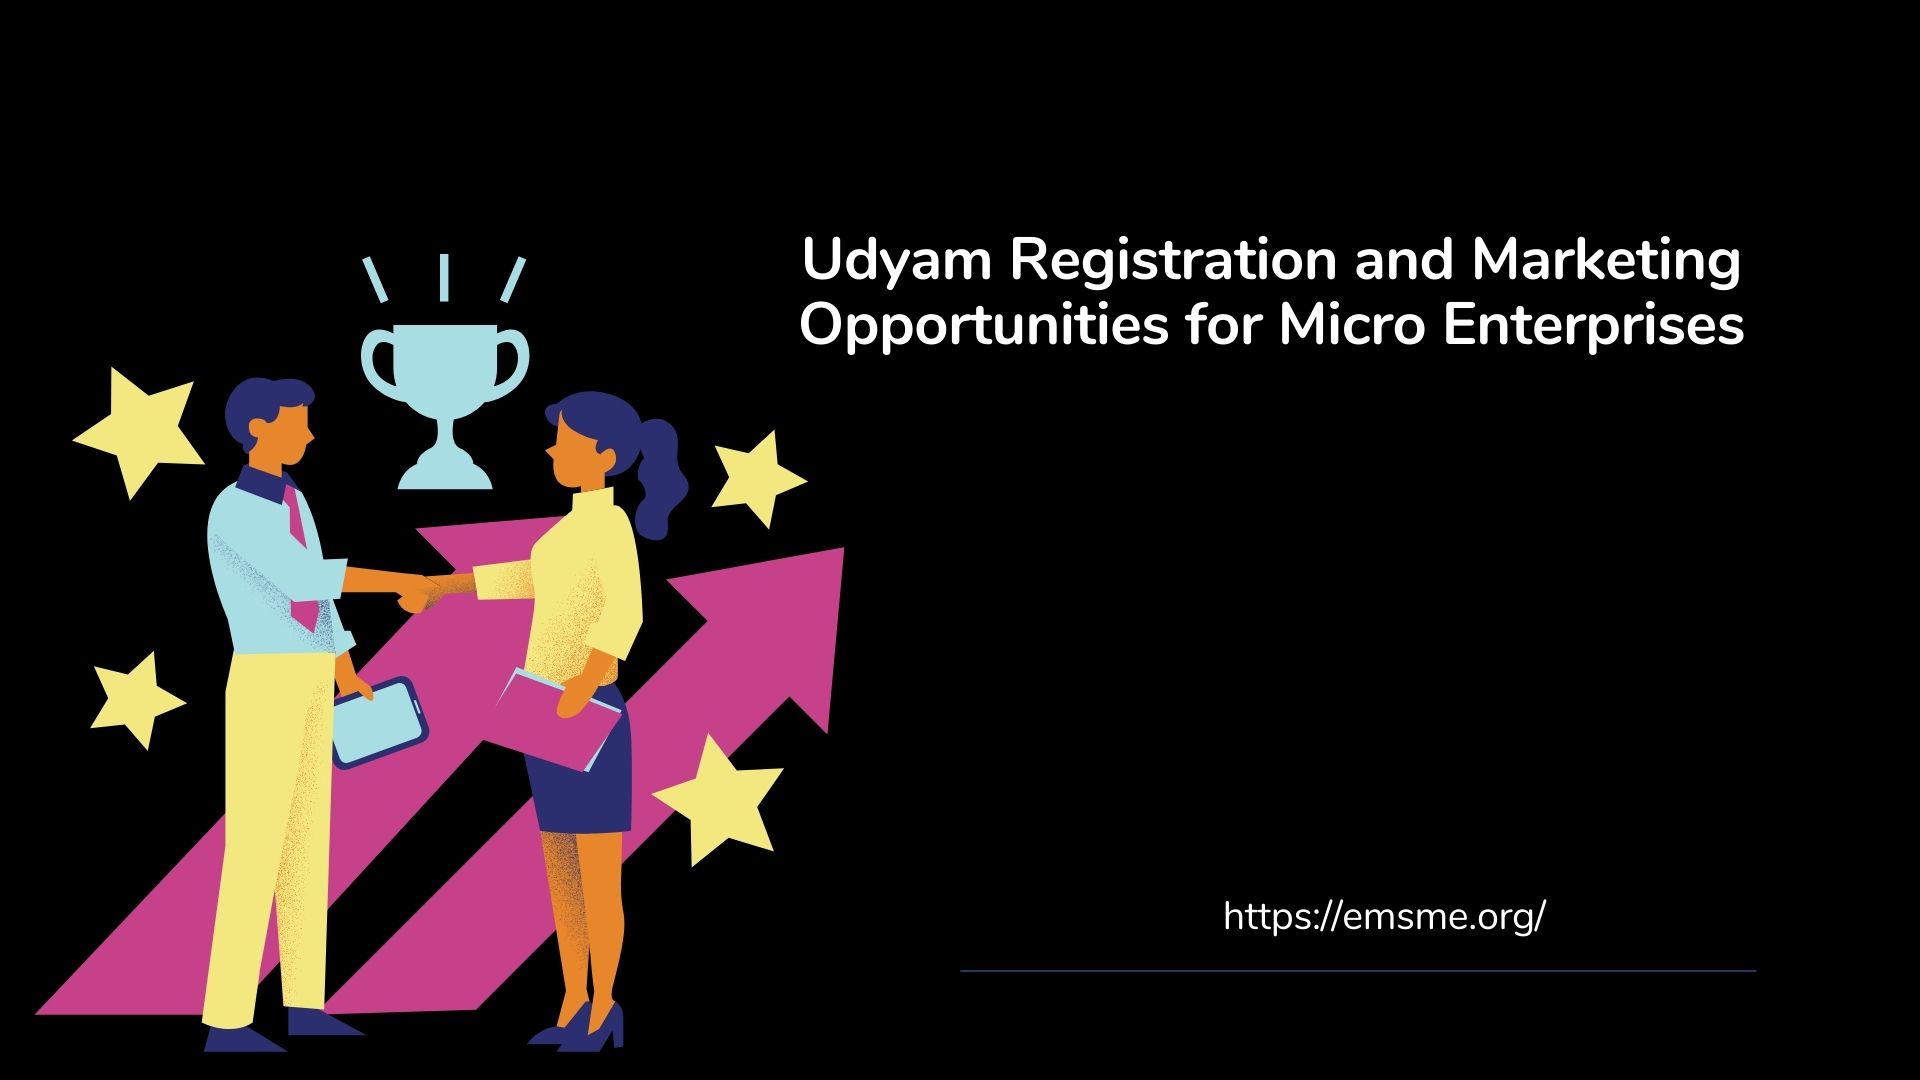 Udyam Registration and Marketing Opportunities for Micro Enterprises